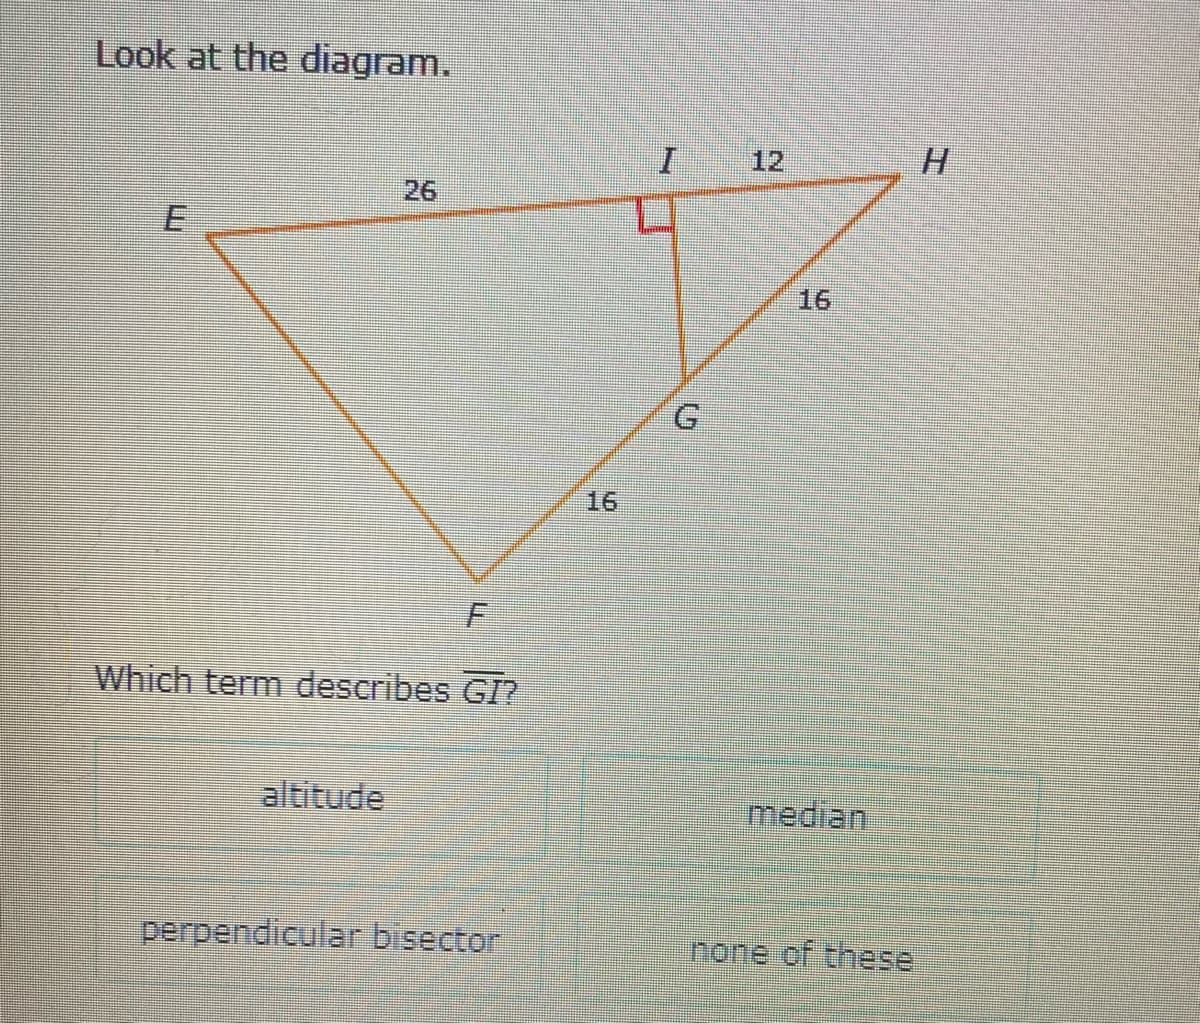 Look at the diagram.
12
H.
26
16
16
Which term describes GI?
altitude
median
perpendicular bisector
none of these
